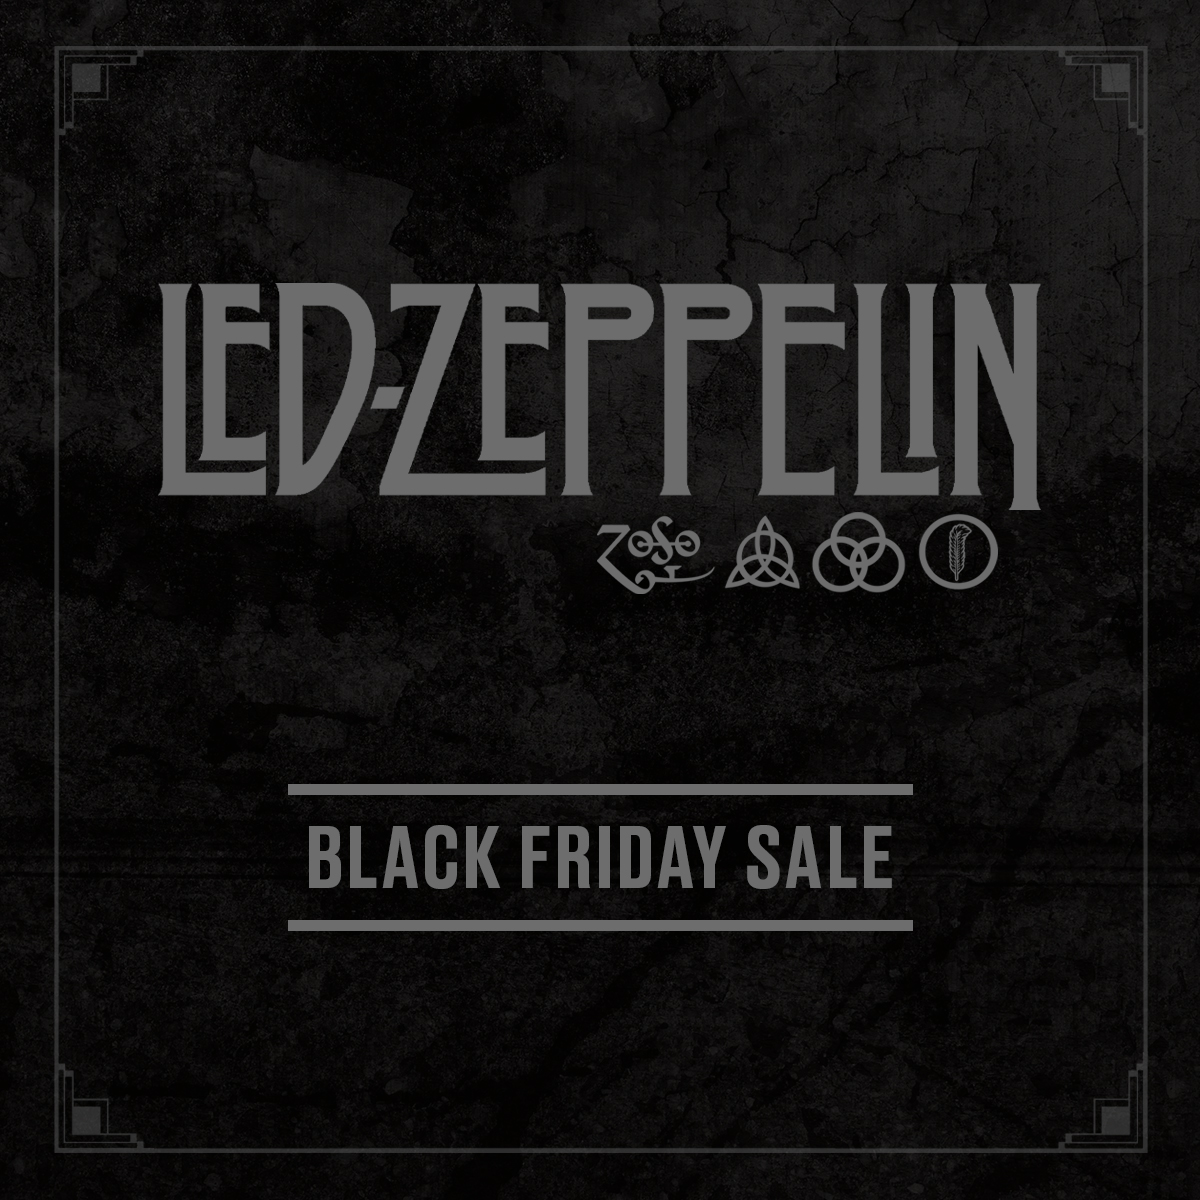 Get 25% off everything in the official Led Zeppelin store this Black Friday when you use the code BLACK25 at checkout! Visit store.ledzeppelin.com now! Code is valid until end of Monday 28th November.